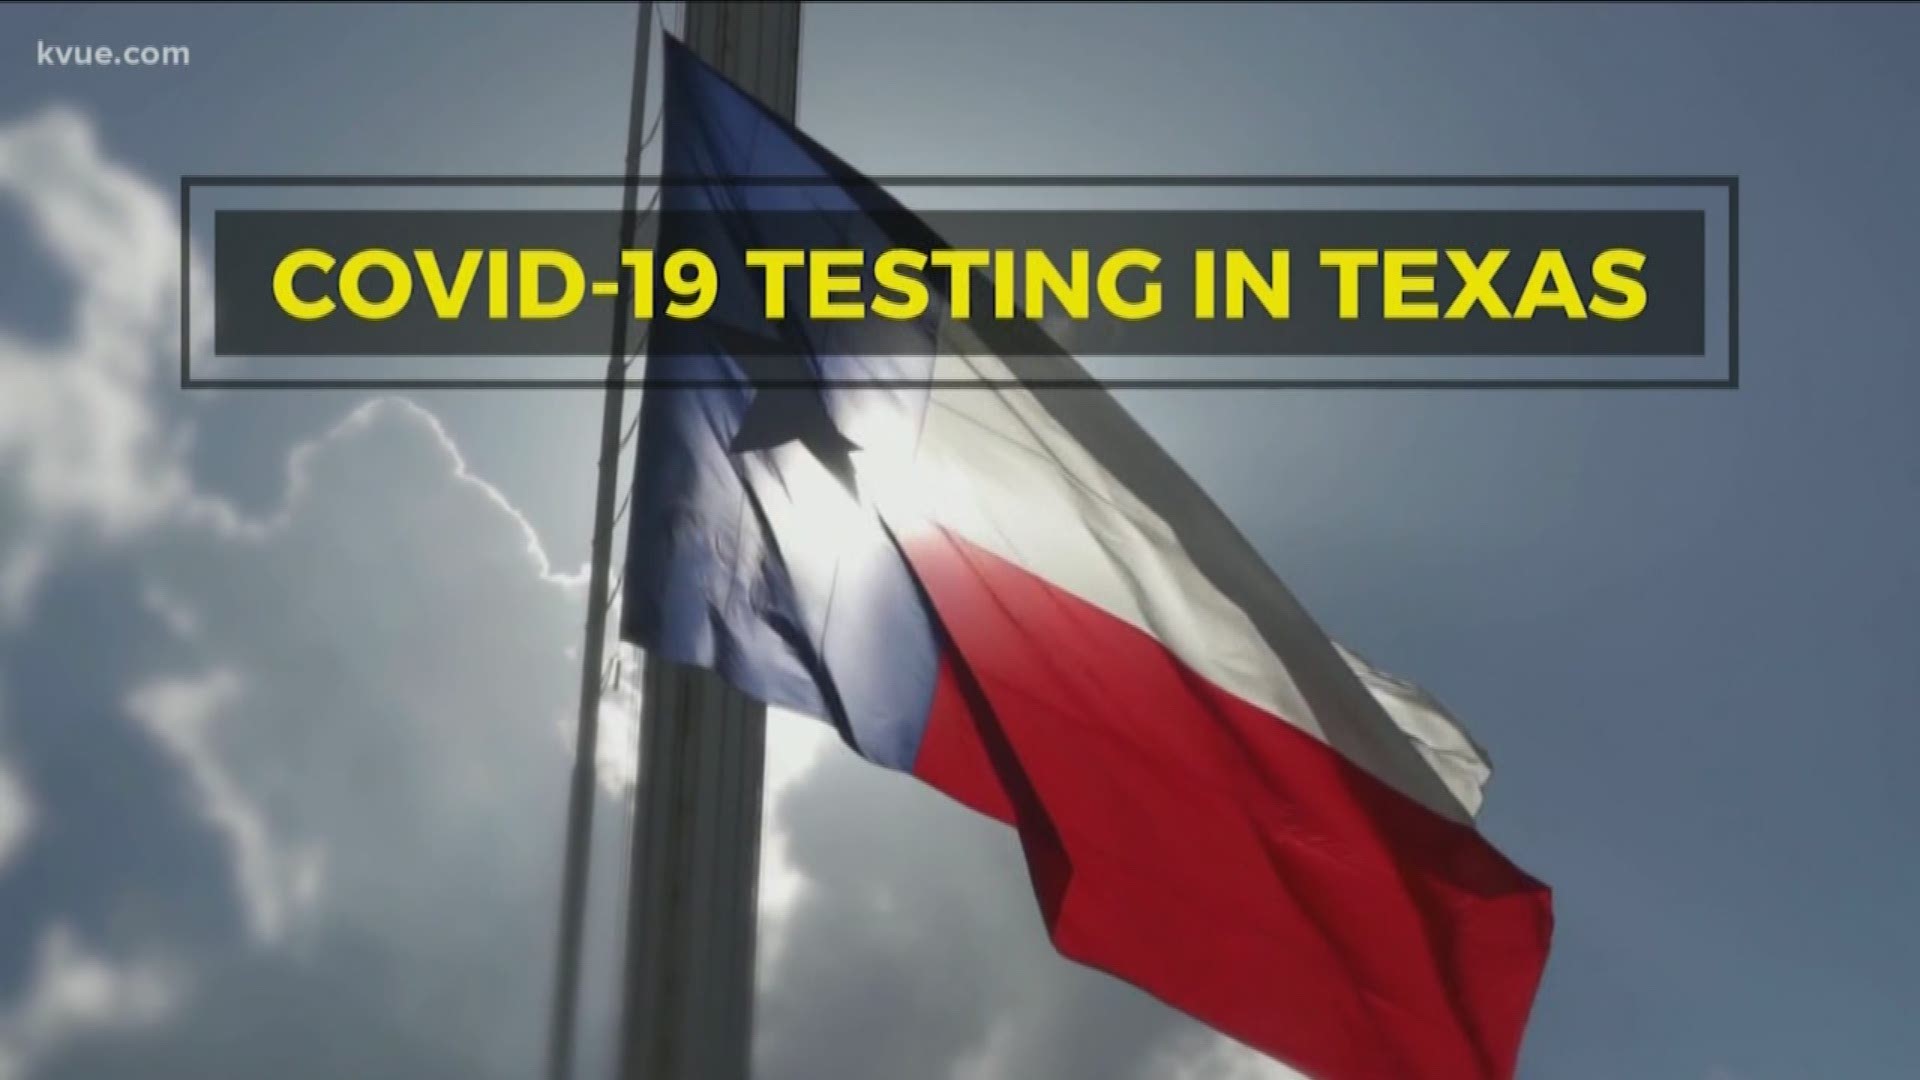 Gov. Abbott has talked a lot about efforts to boost testing. Bob Buckalew crunches the numbers to see how Texas is doing.